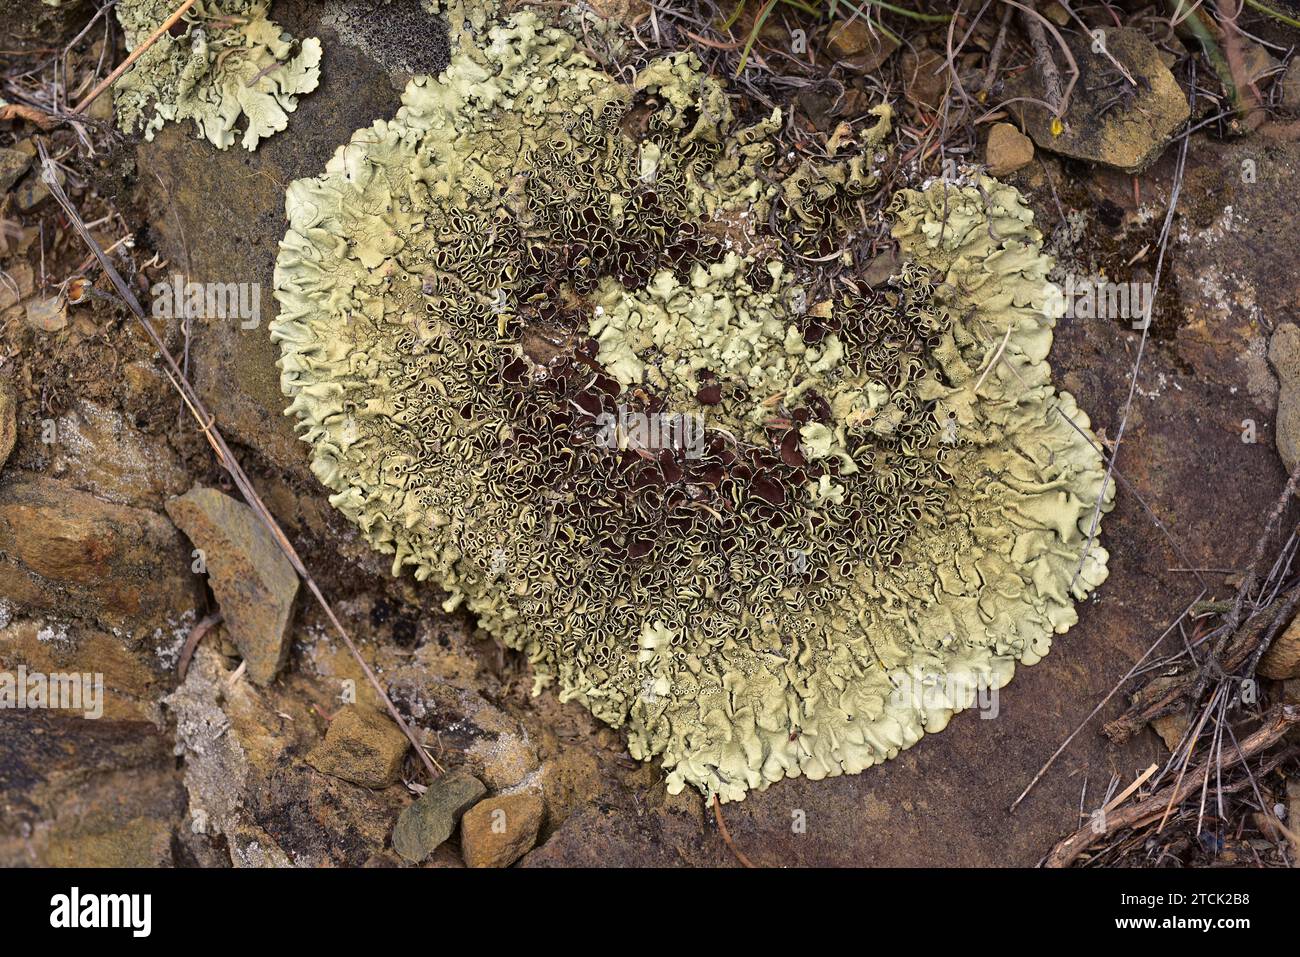 Xanthoparmelia conspersa or Parmelia conspersa is a foliose lichen that grows on siliceous rocks. This photo was taken in La Albera, Girona province, Stock Photo